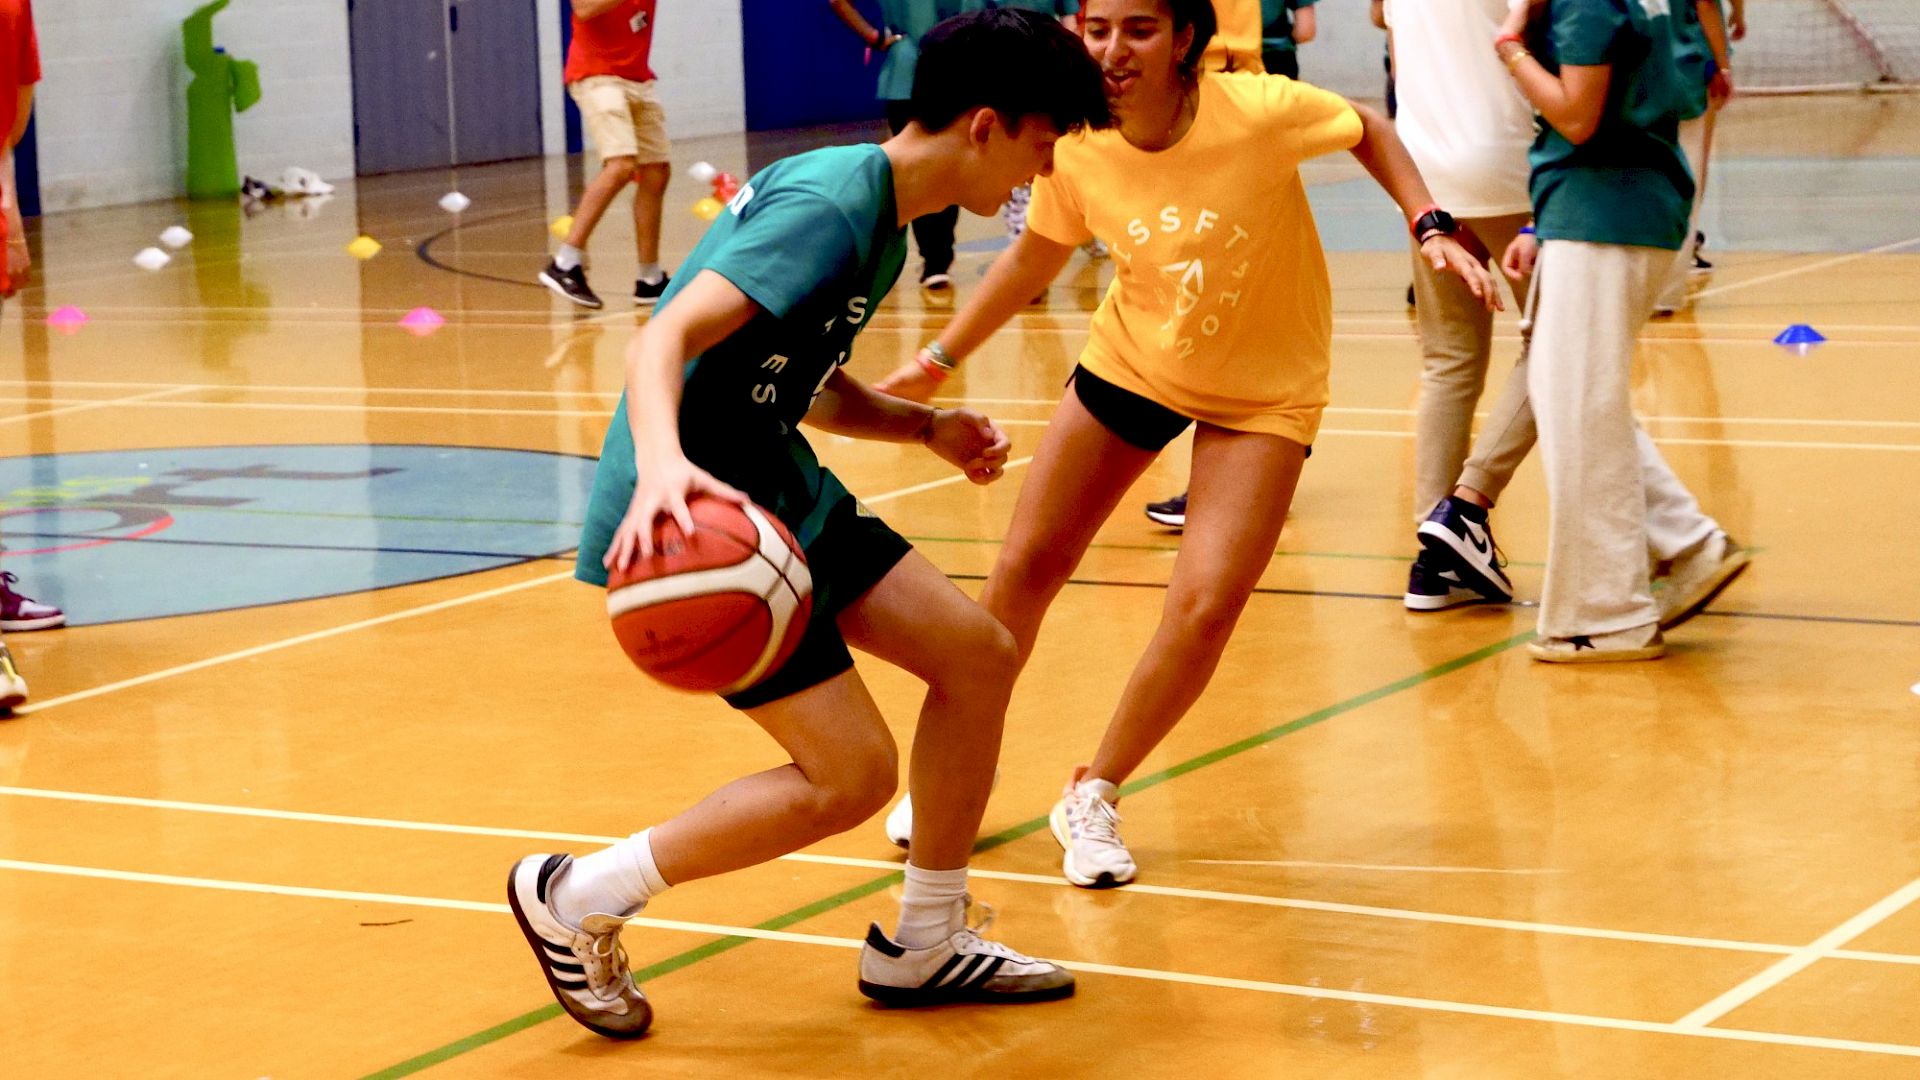 ISSFT students playing basketball